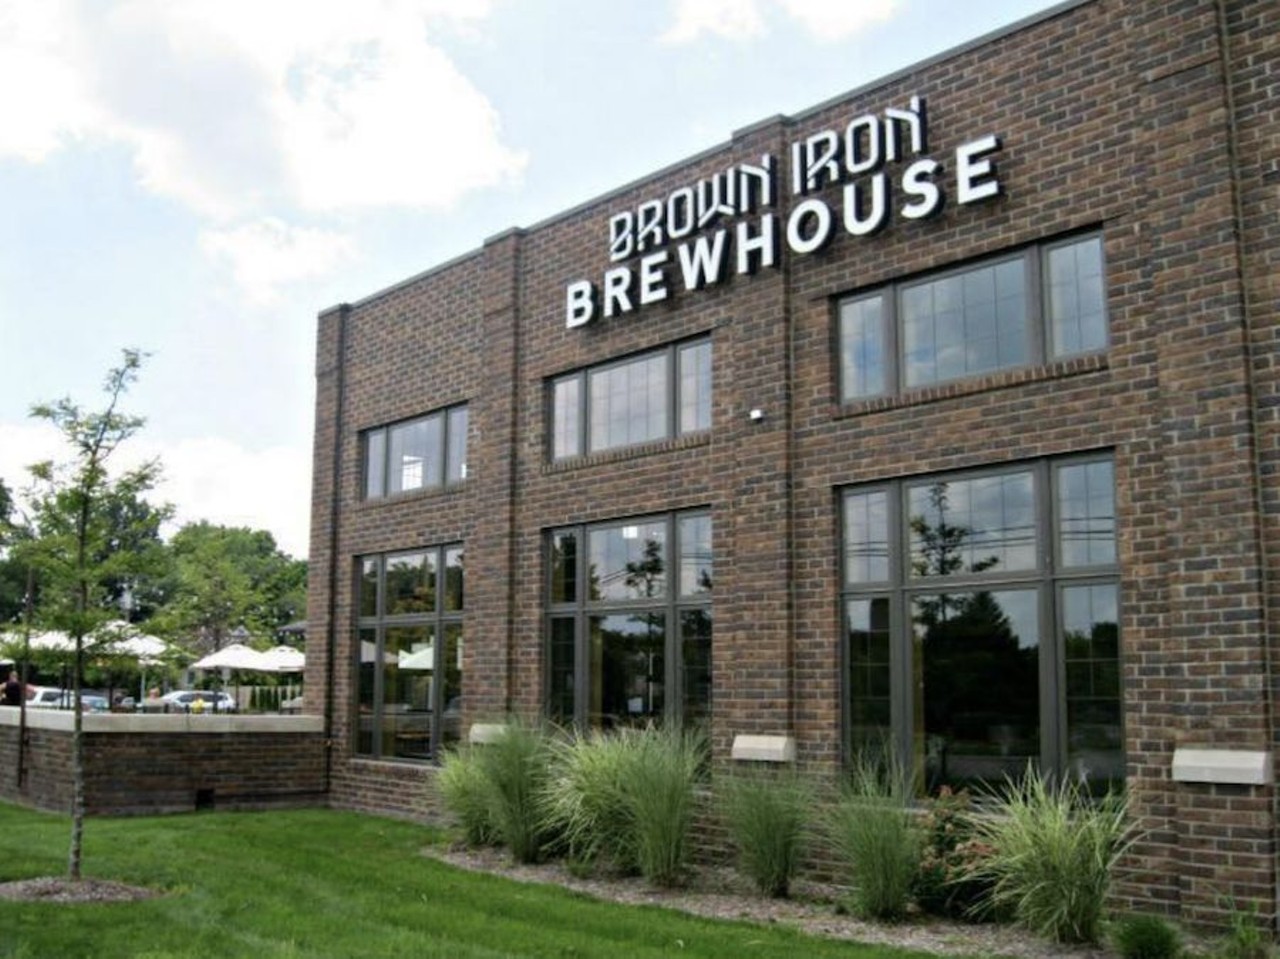 Brown Iron Brewhouse
30955 Woodward Ave., Royal Oak; 248-951-2659; browniron.com
American beer is paired with smokehouse cuisine at Brown Iron, which specializes in “fresh food made daily.” The menu includes pulled pork, brisket, “beer-can” chicken, and more meats smoked fresh in a smoker every day. There are plenty of gluten-free options too. Plus, all dressings and BBQ sauces are made from scratch.